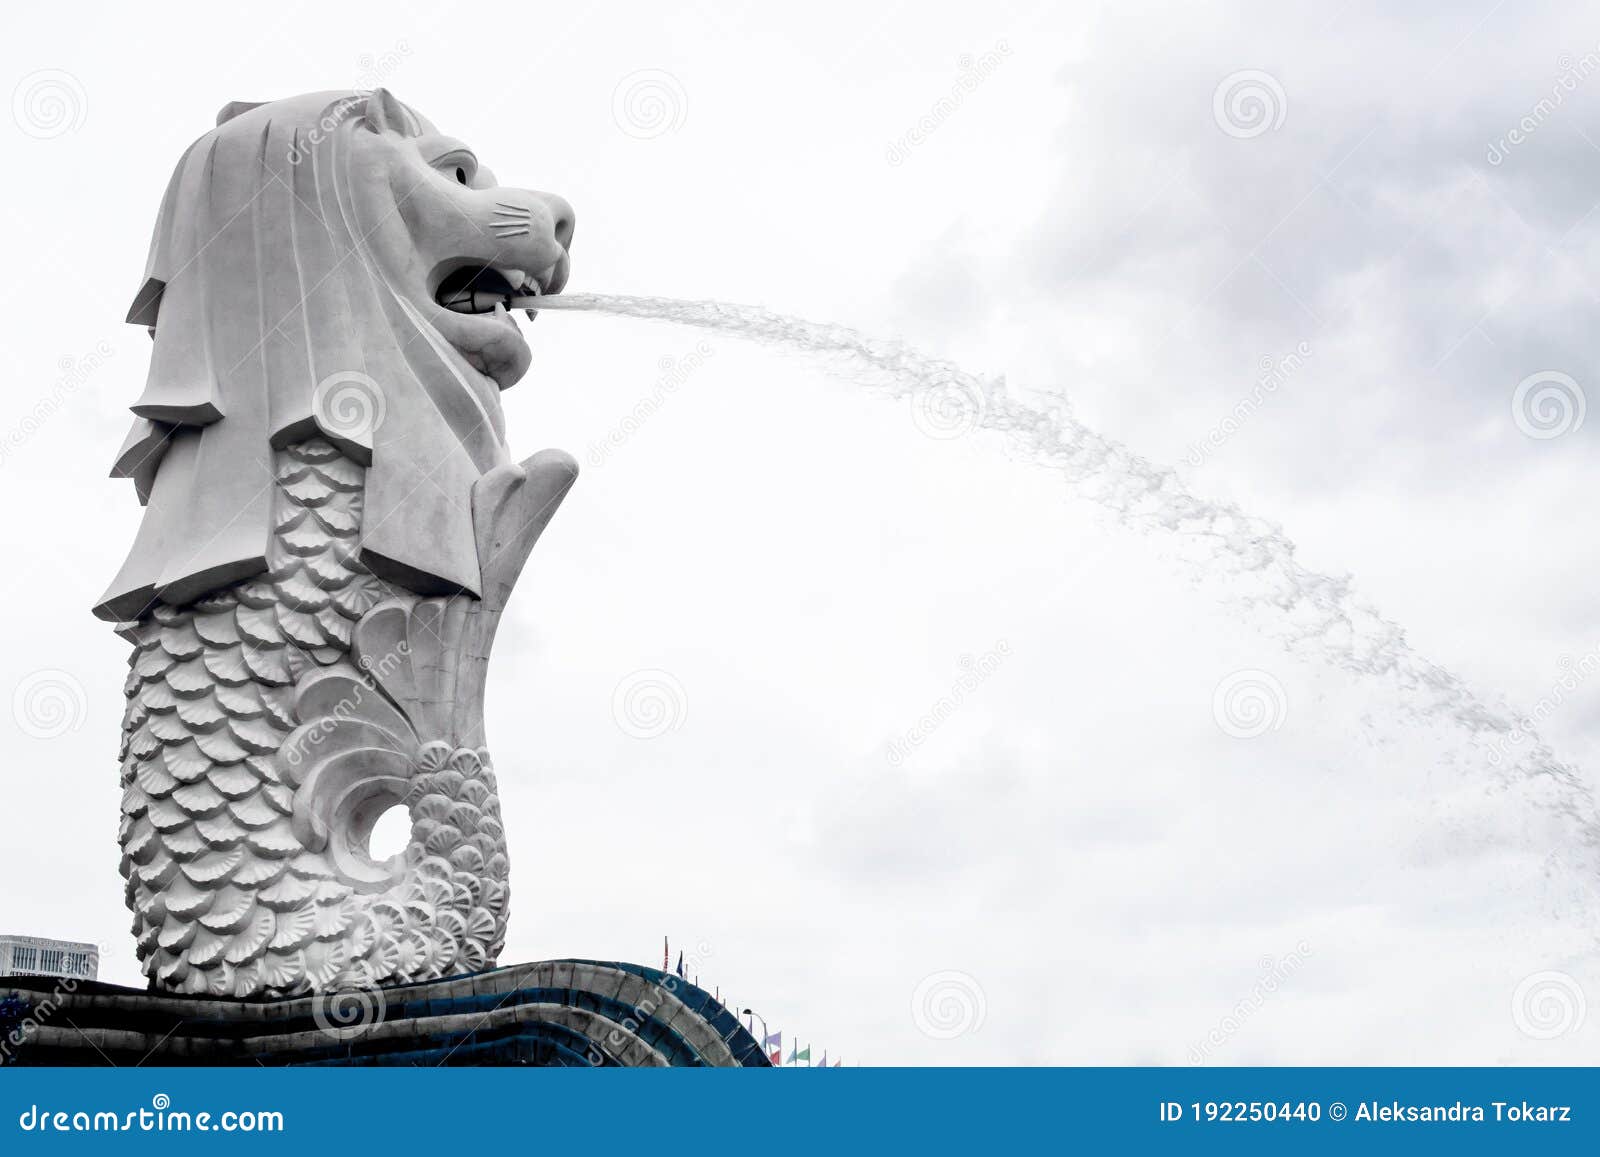 The Merlion Lion Sculpture, National Landmark of Singapore, in Merlion  Park, Minimalist View. Editorial Image - Image of creature, lion: 192250440